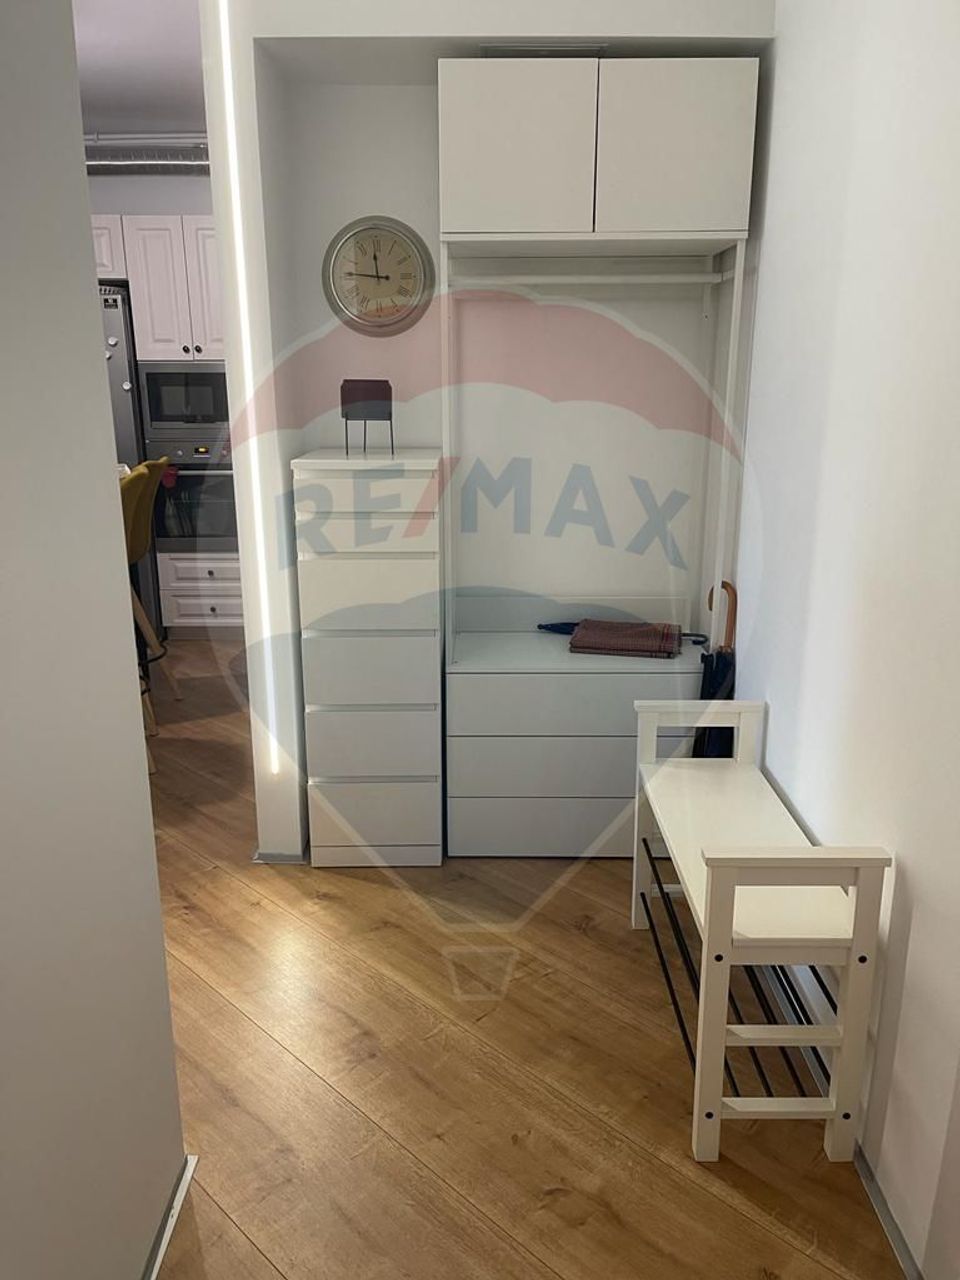 Apartment with 3 rooms for rent + parking space in Pipera area